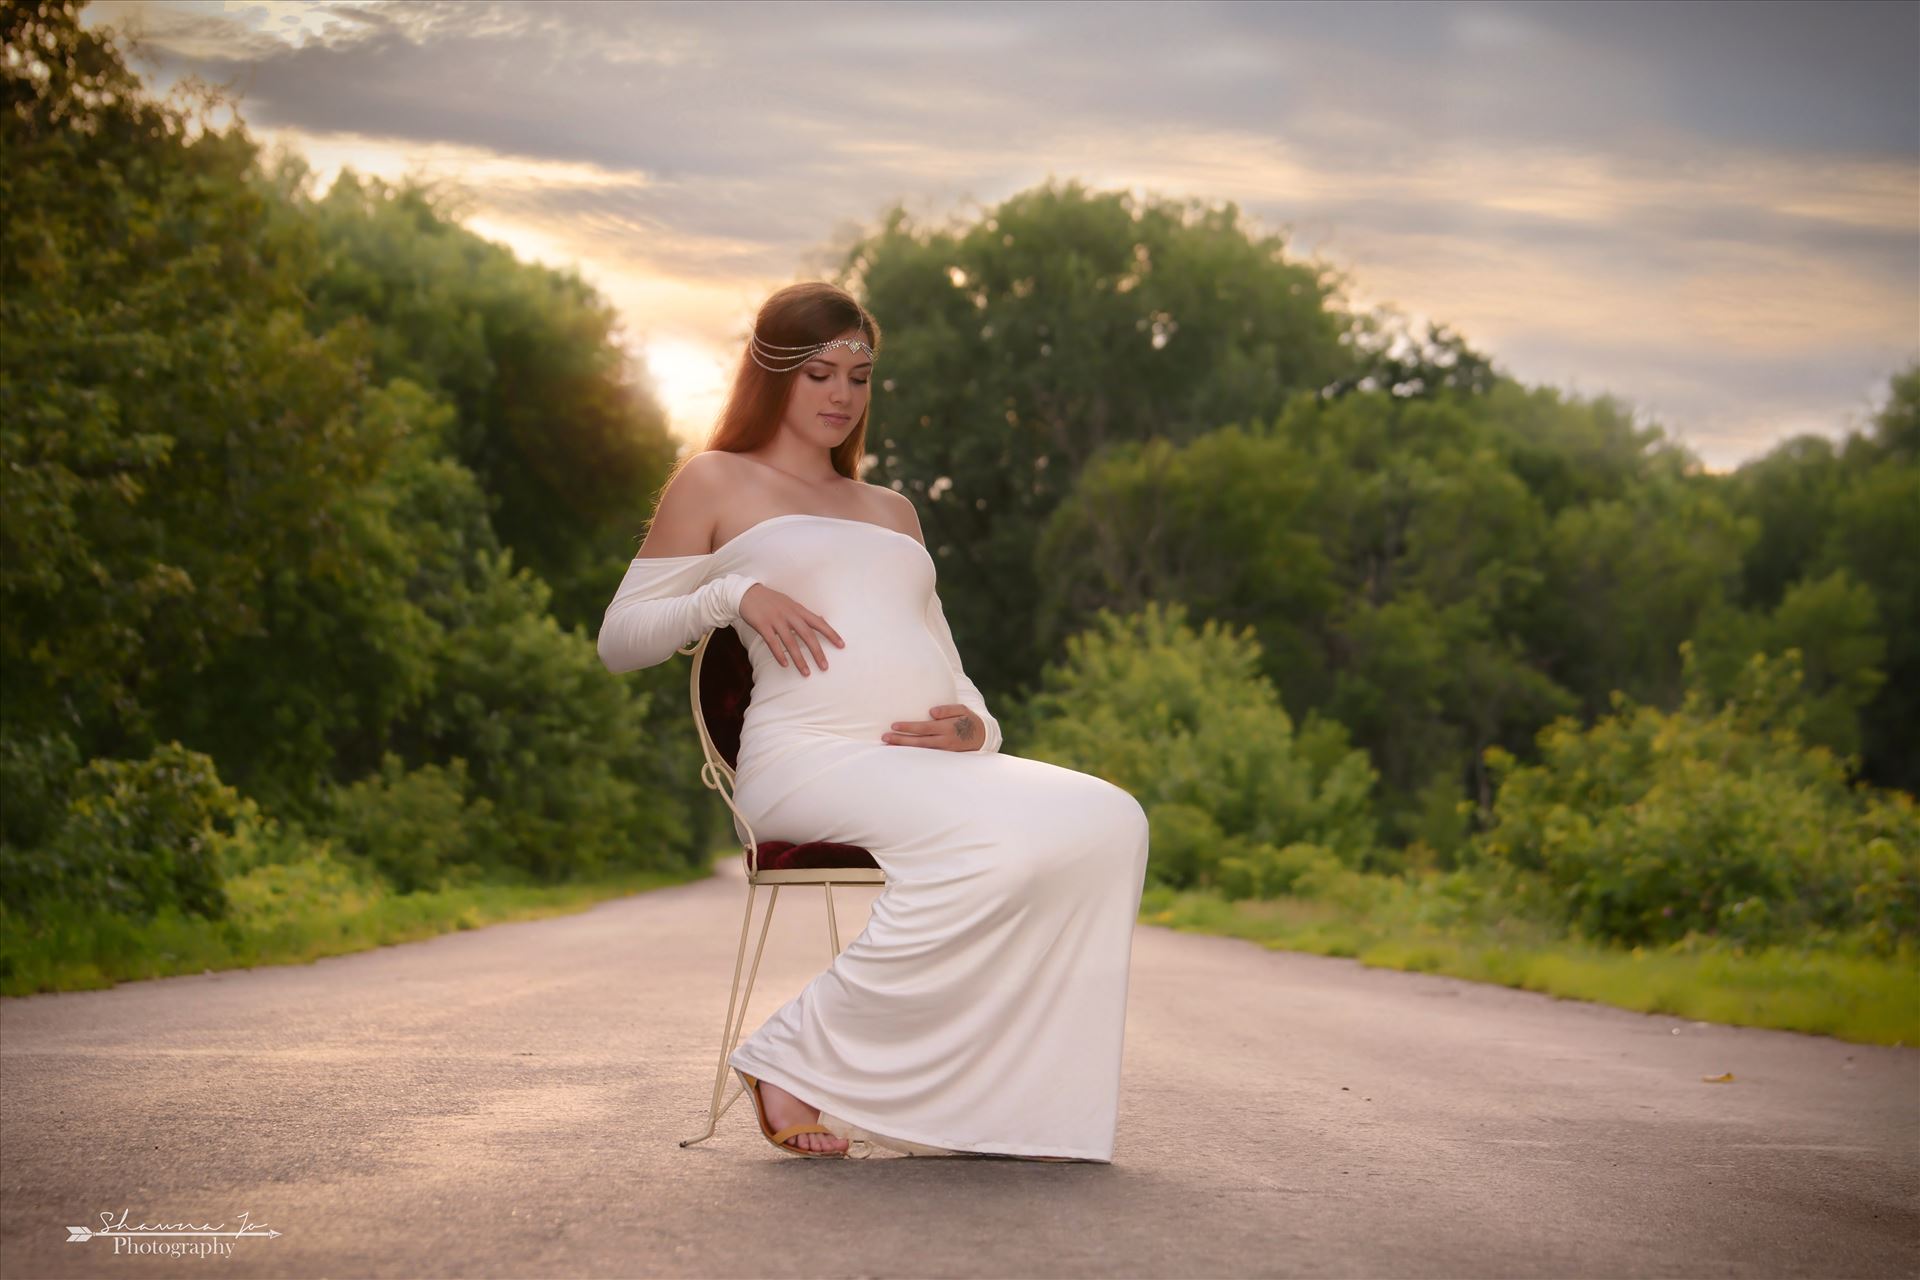 DSC_4781editwm.jpg - This mama is absolute stunning in all her pregnancy beauty by Shawna Jo Photography